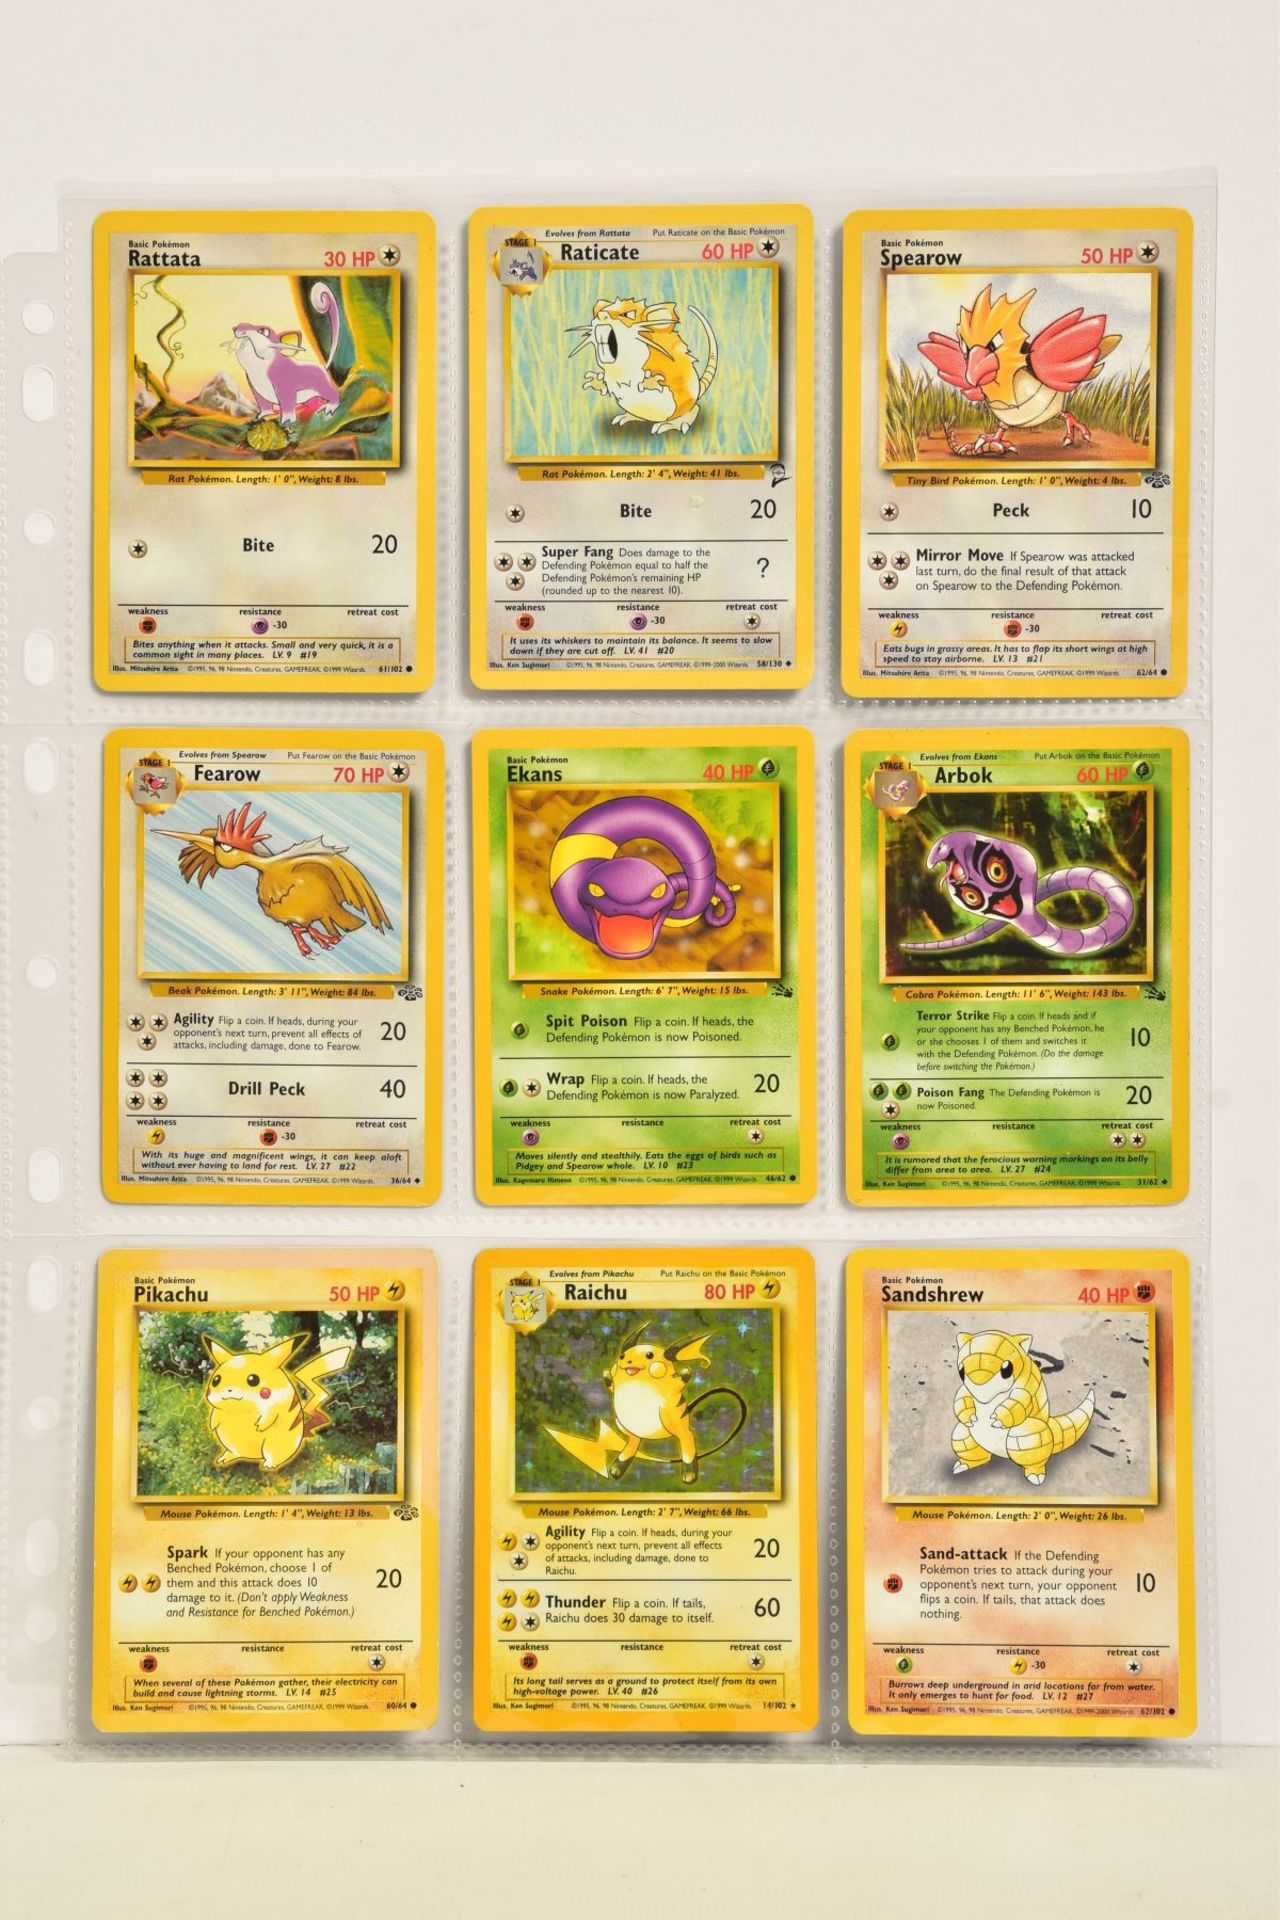 POKEMON THE TRADING CARD GAME 154 CARDS IN POKEMON TCG FOLDER, includes one of each of the - Image 4 of 20